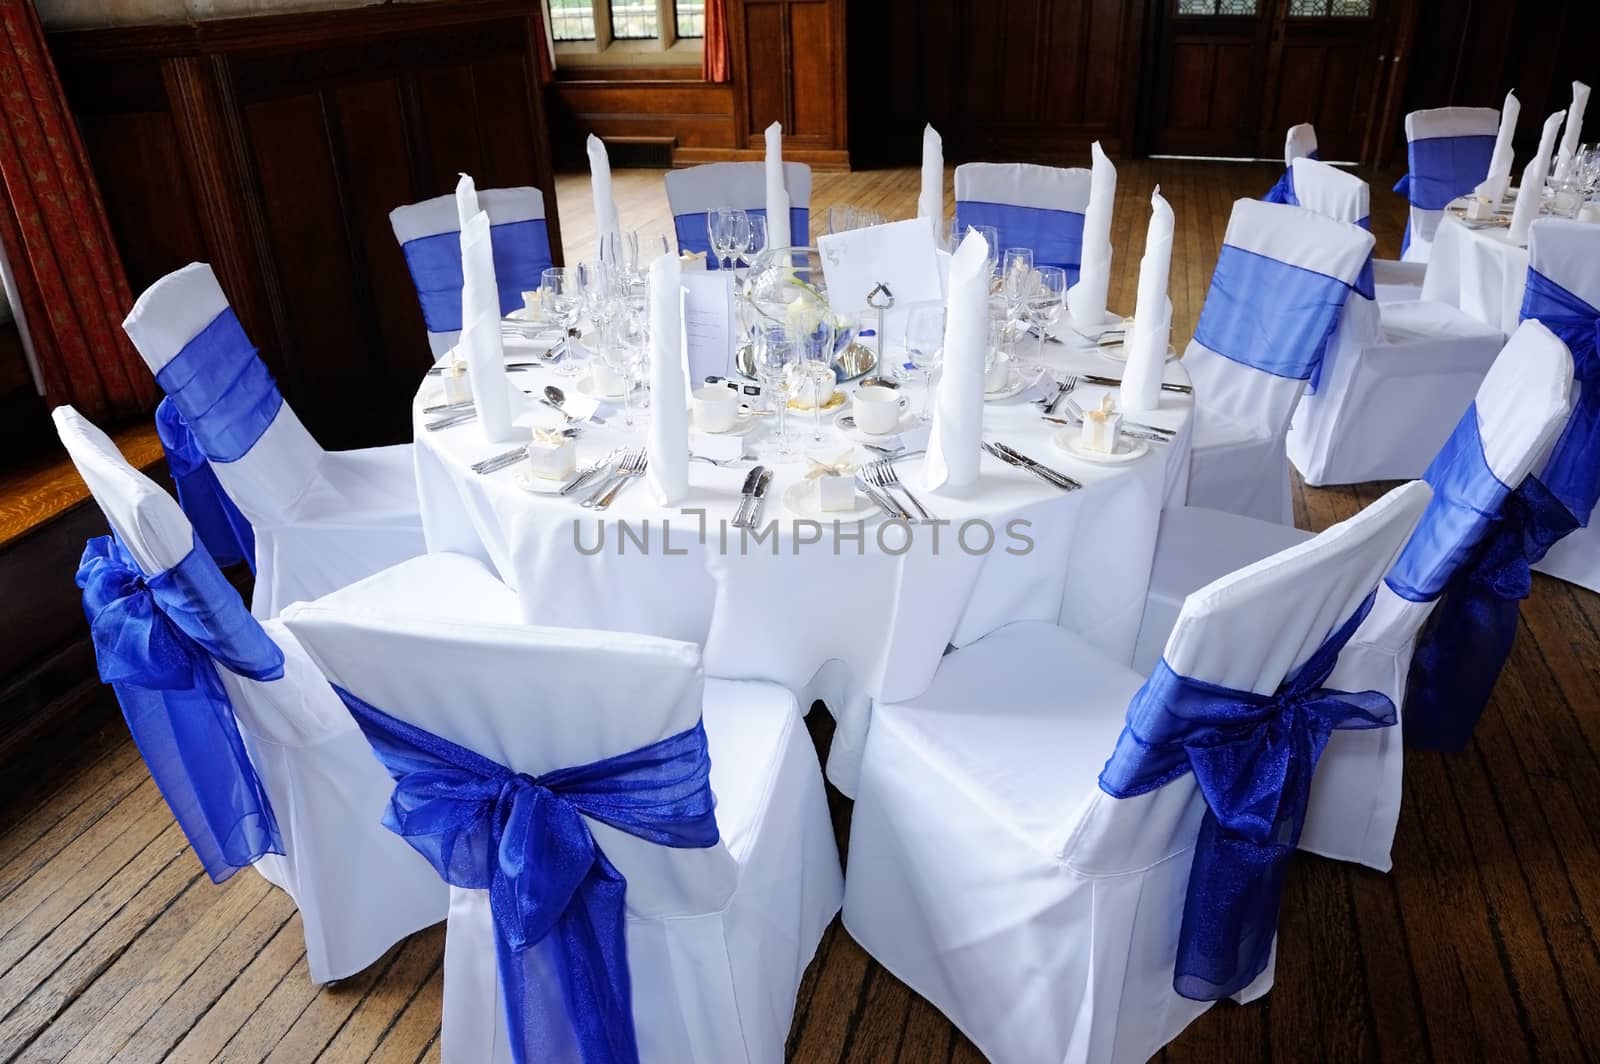 Table and chairs decorated in blue and white at wedding reception